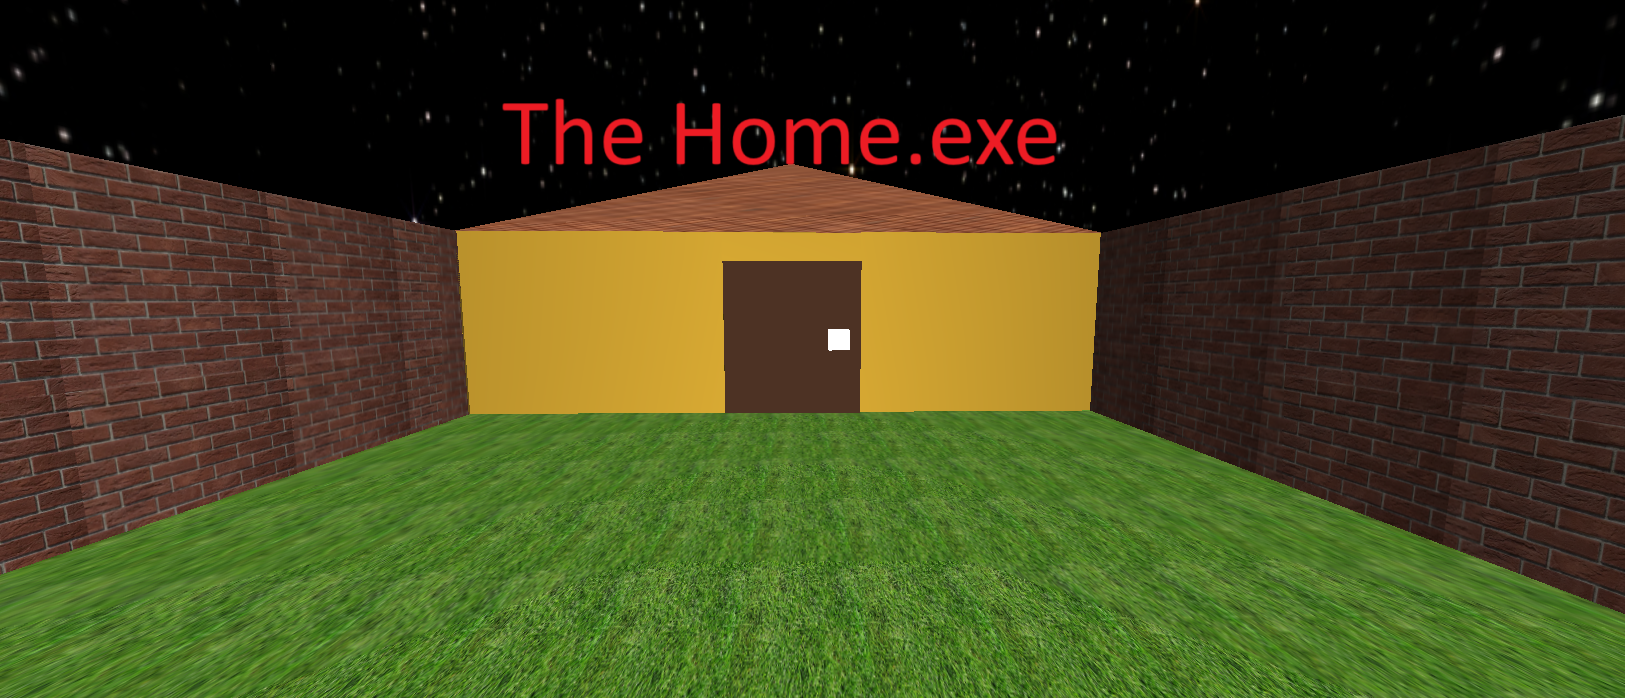 The Home.exe